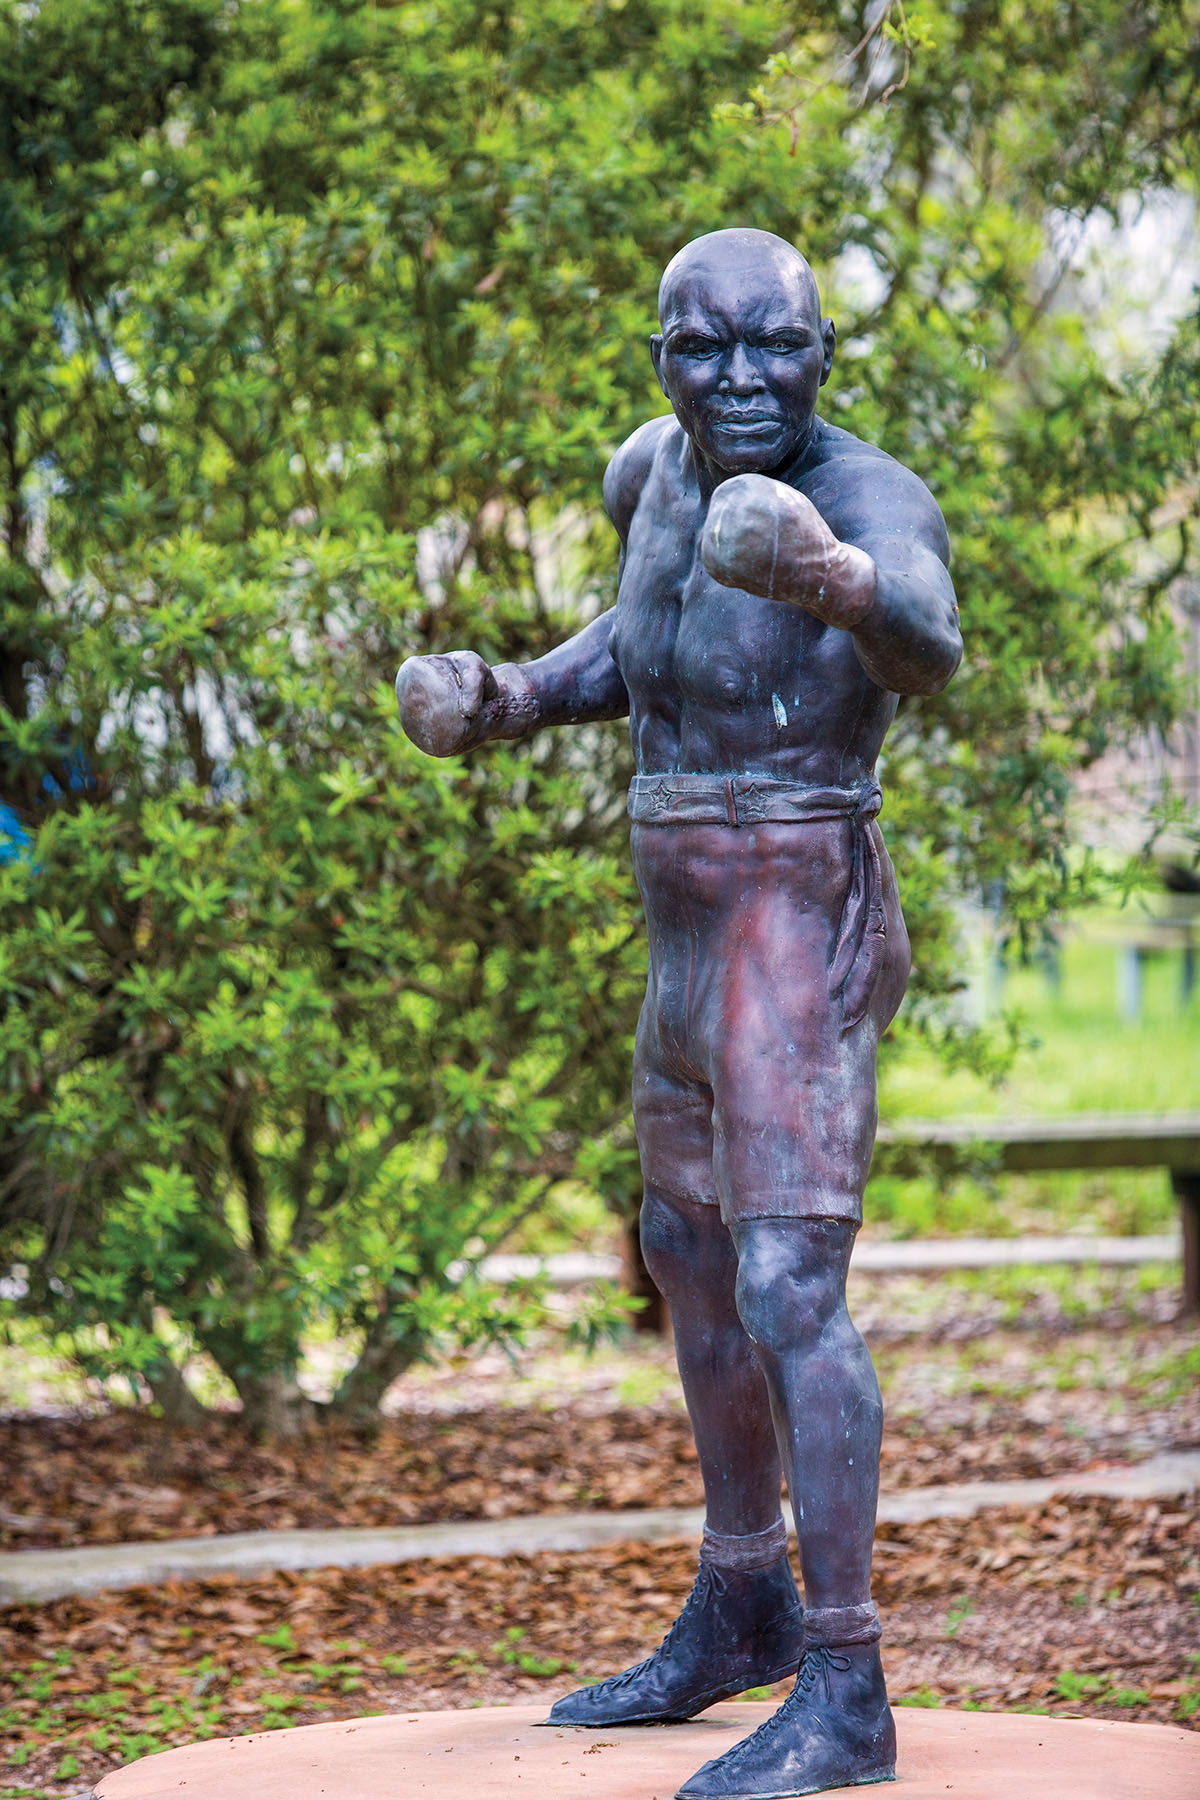 A dark bronze statue of a man with hids fists up in front of green trees